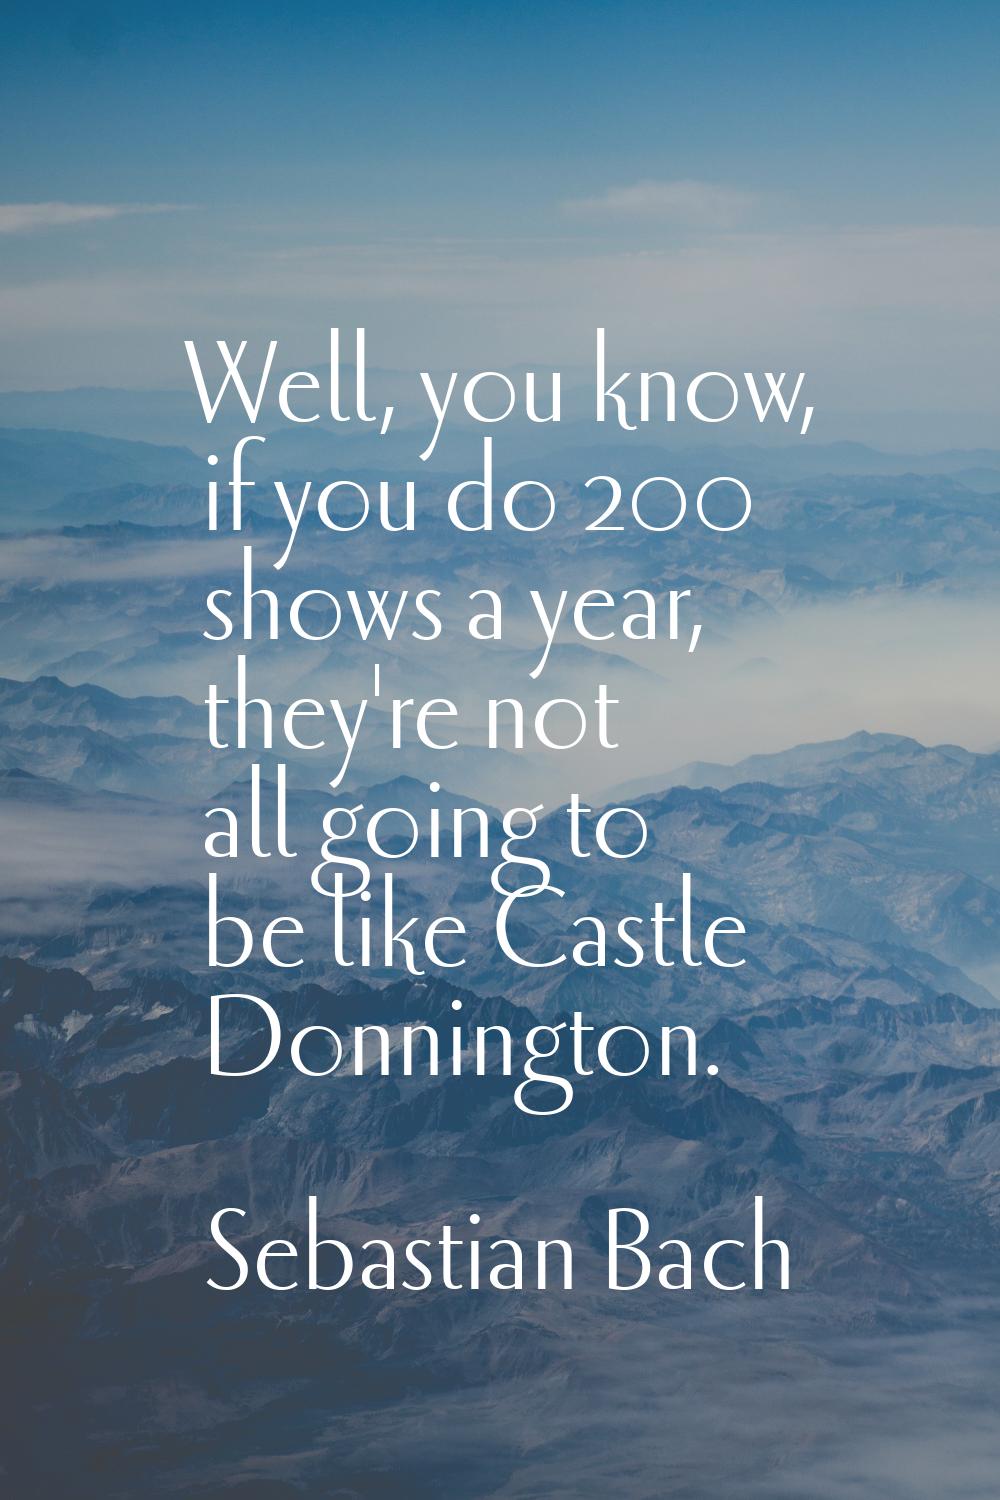 Well, you know, if you do 200 shows a year, they're not all going to be like Castle Donnington.